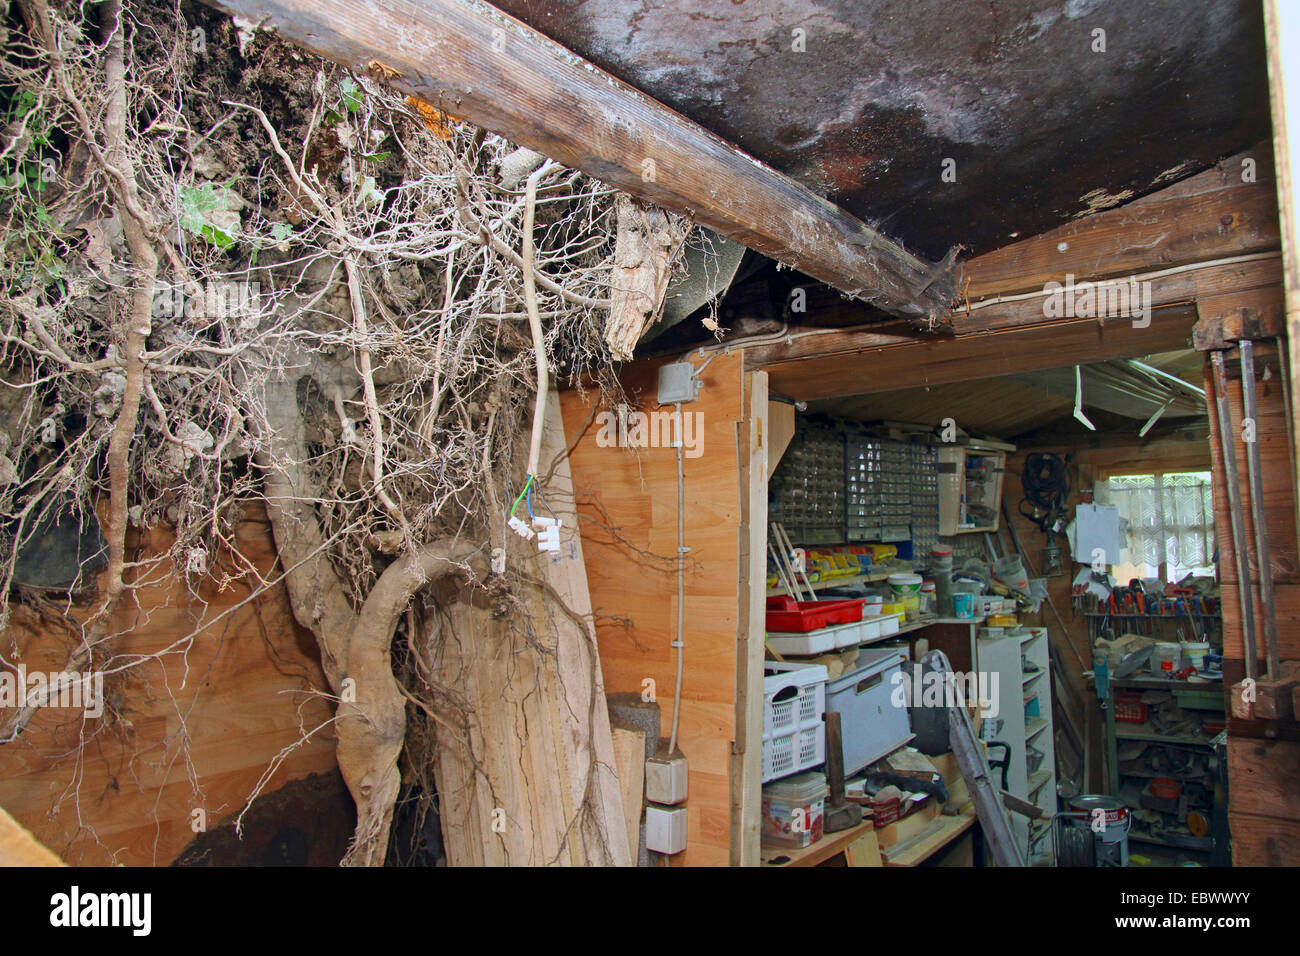 tree root of a disrooted tree destroyed the roof of a wooden hut, Germany Stock Photo